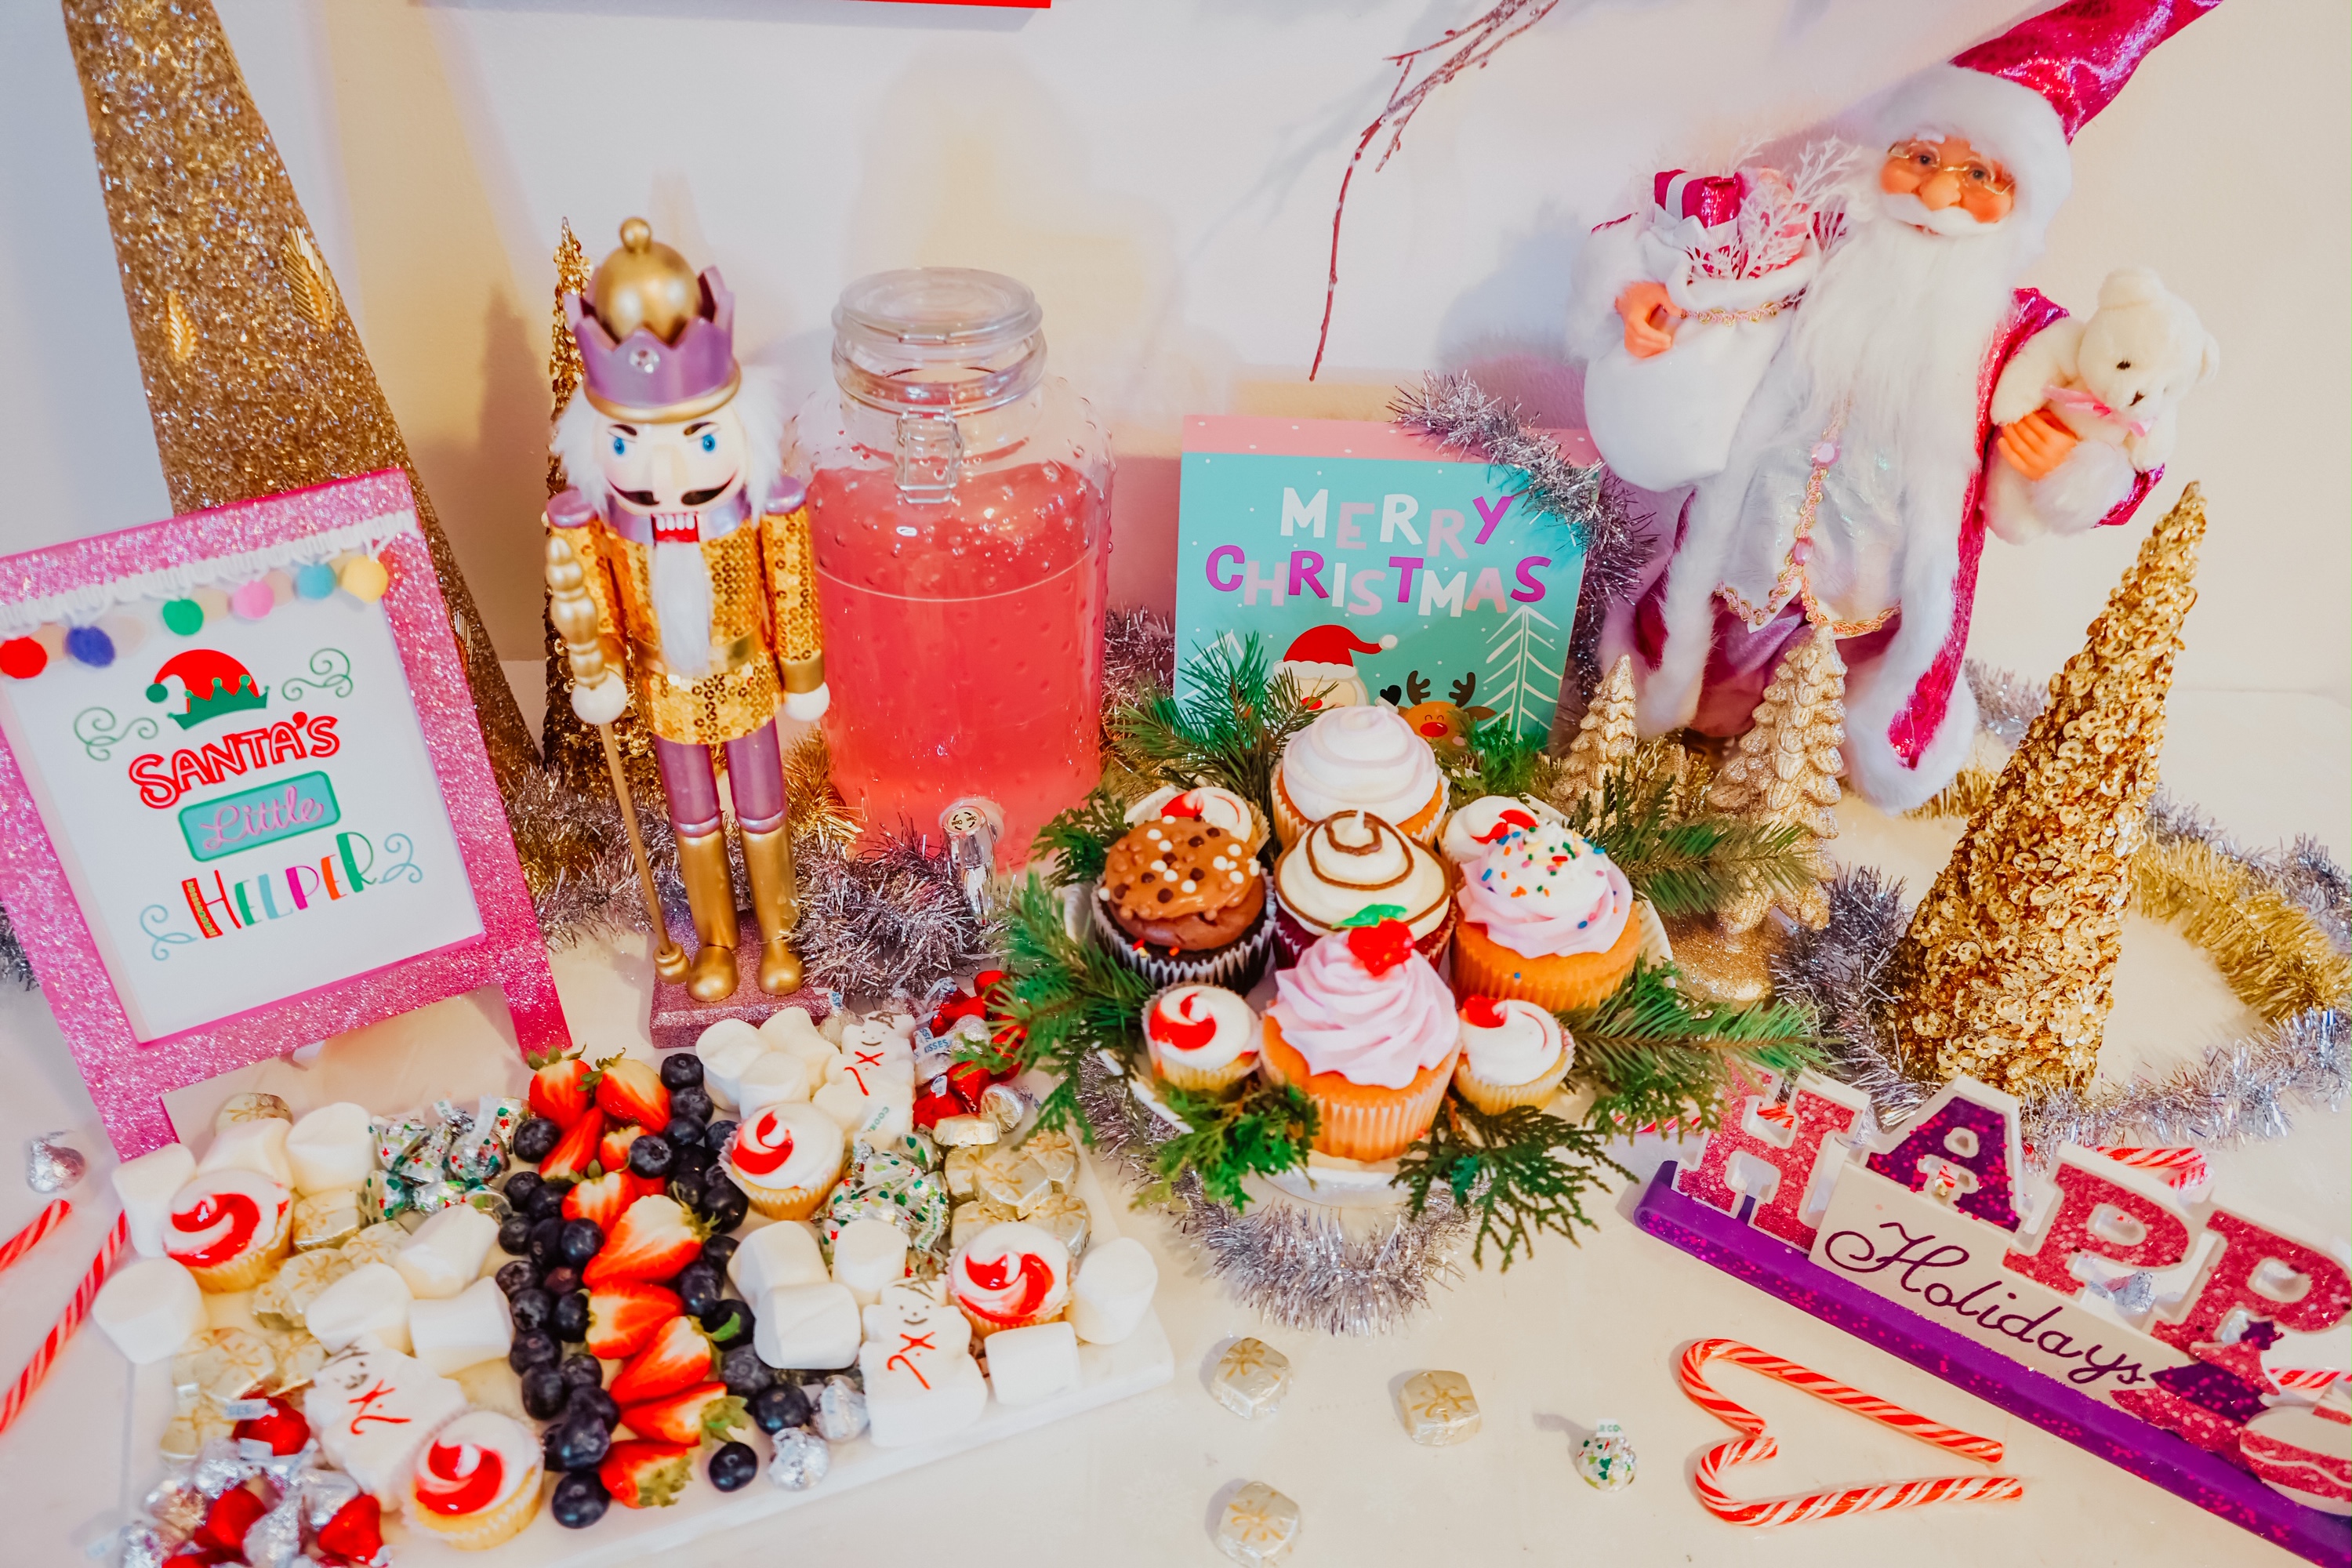 Pink and sparkly Christmas party the little princesses will love ...